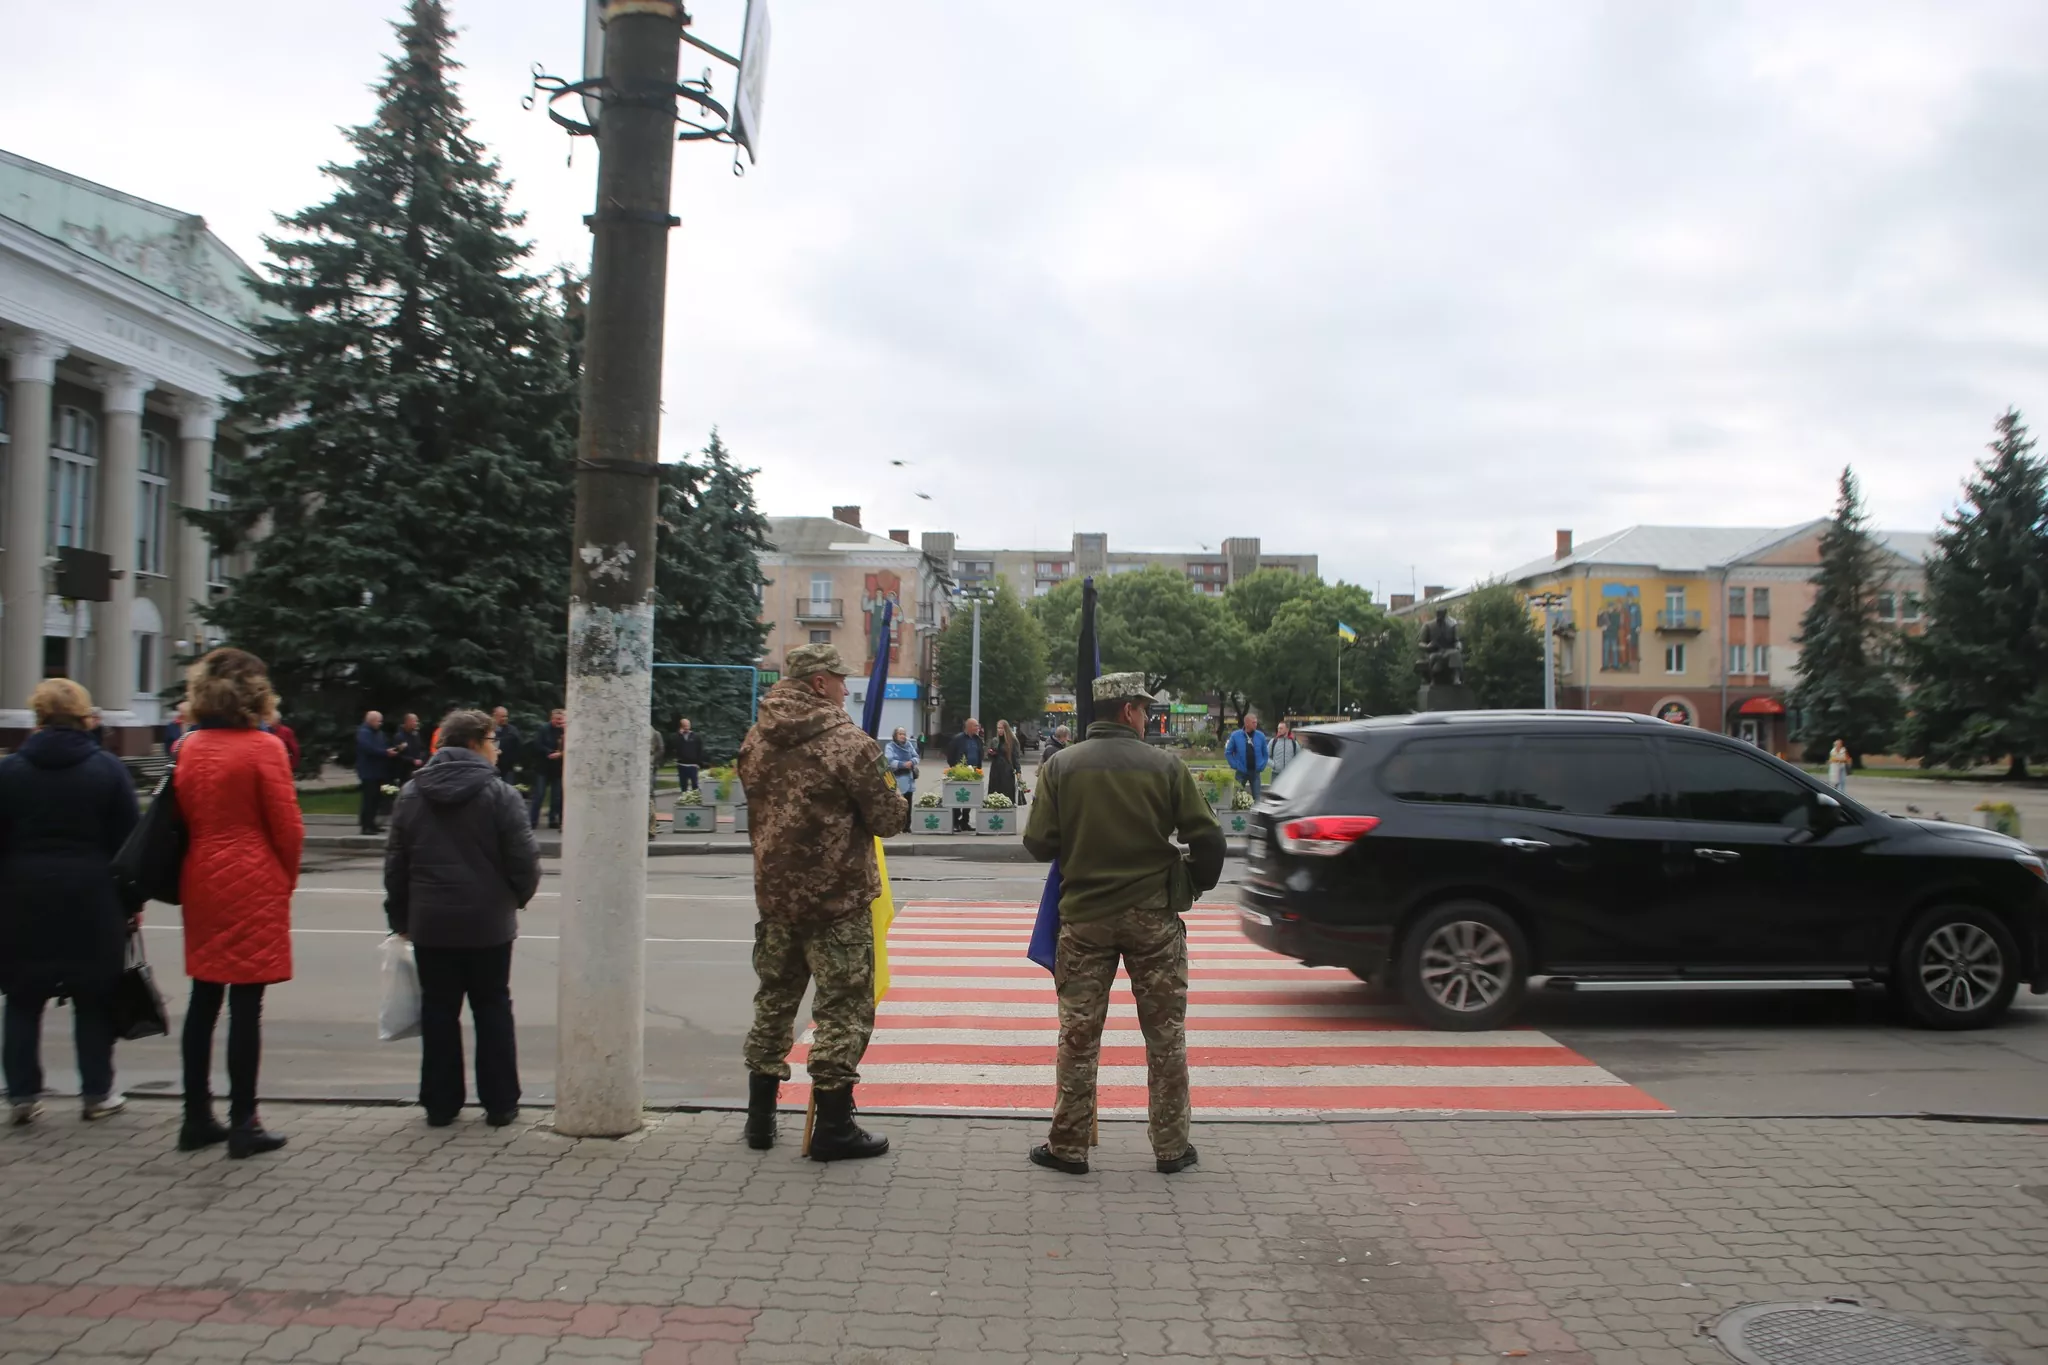 On the day we arrived in Novovolynsk, three soldiers’ funerals were held simultaneously. Many people came to the central street to commemorate them and say a final goodbye, kneeling as they saw off the ceremony. Photo by Euromaidan Press ~